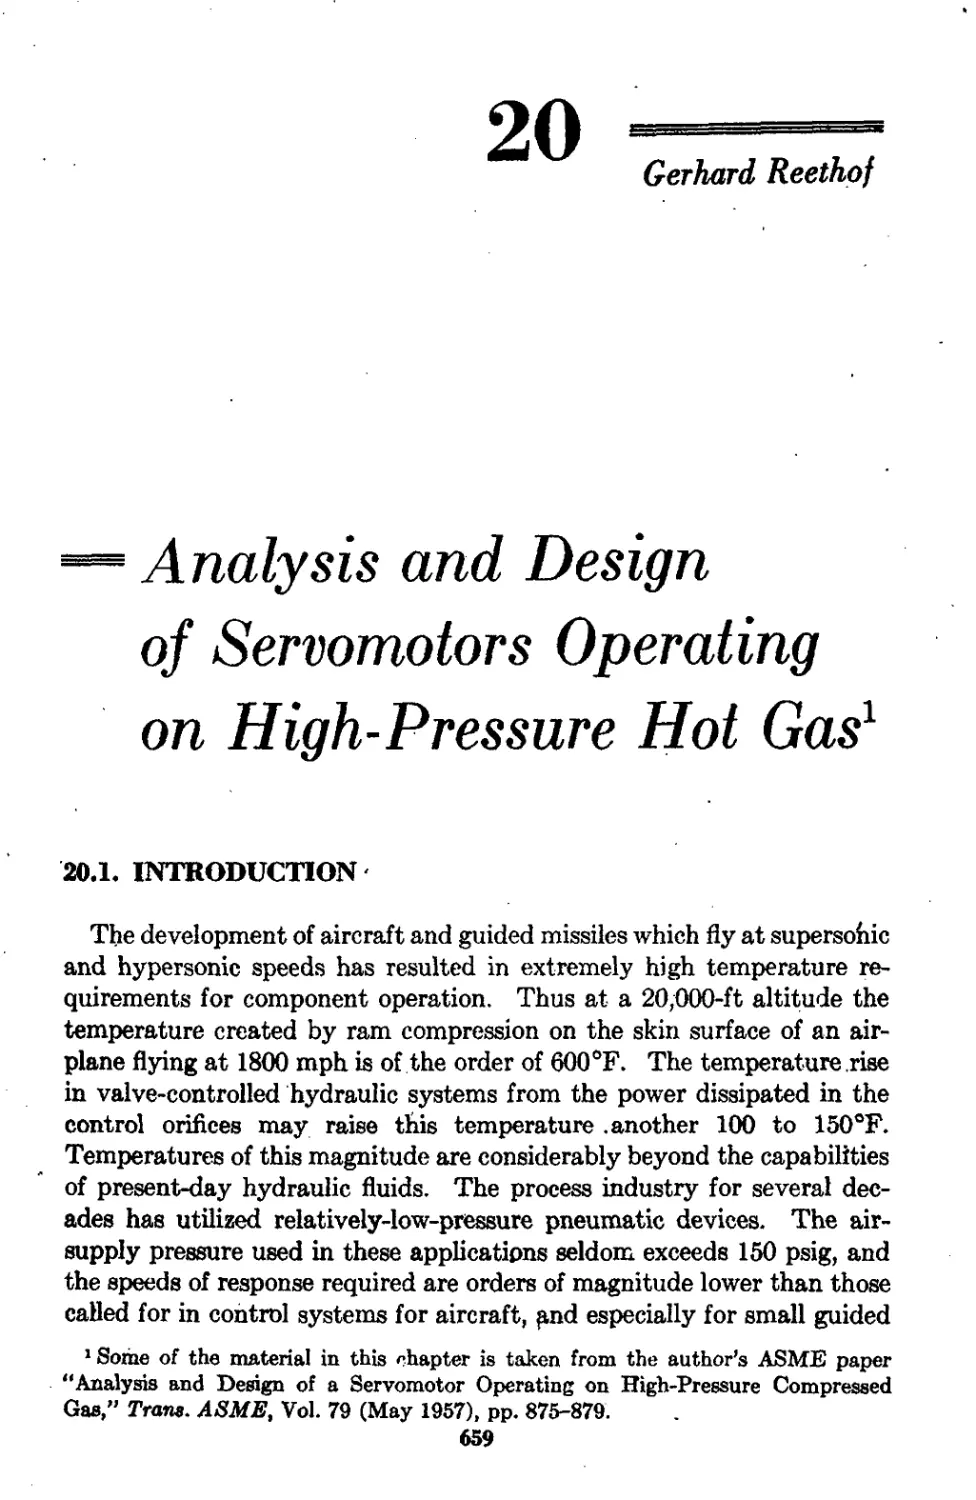 Chapter 20 Analysis and Design of Servomotors Operating on High-Pressure Hot Gas: Gerhard Reethof